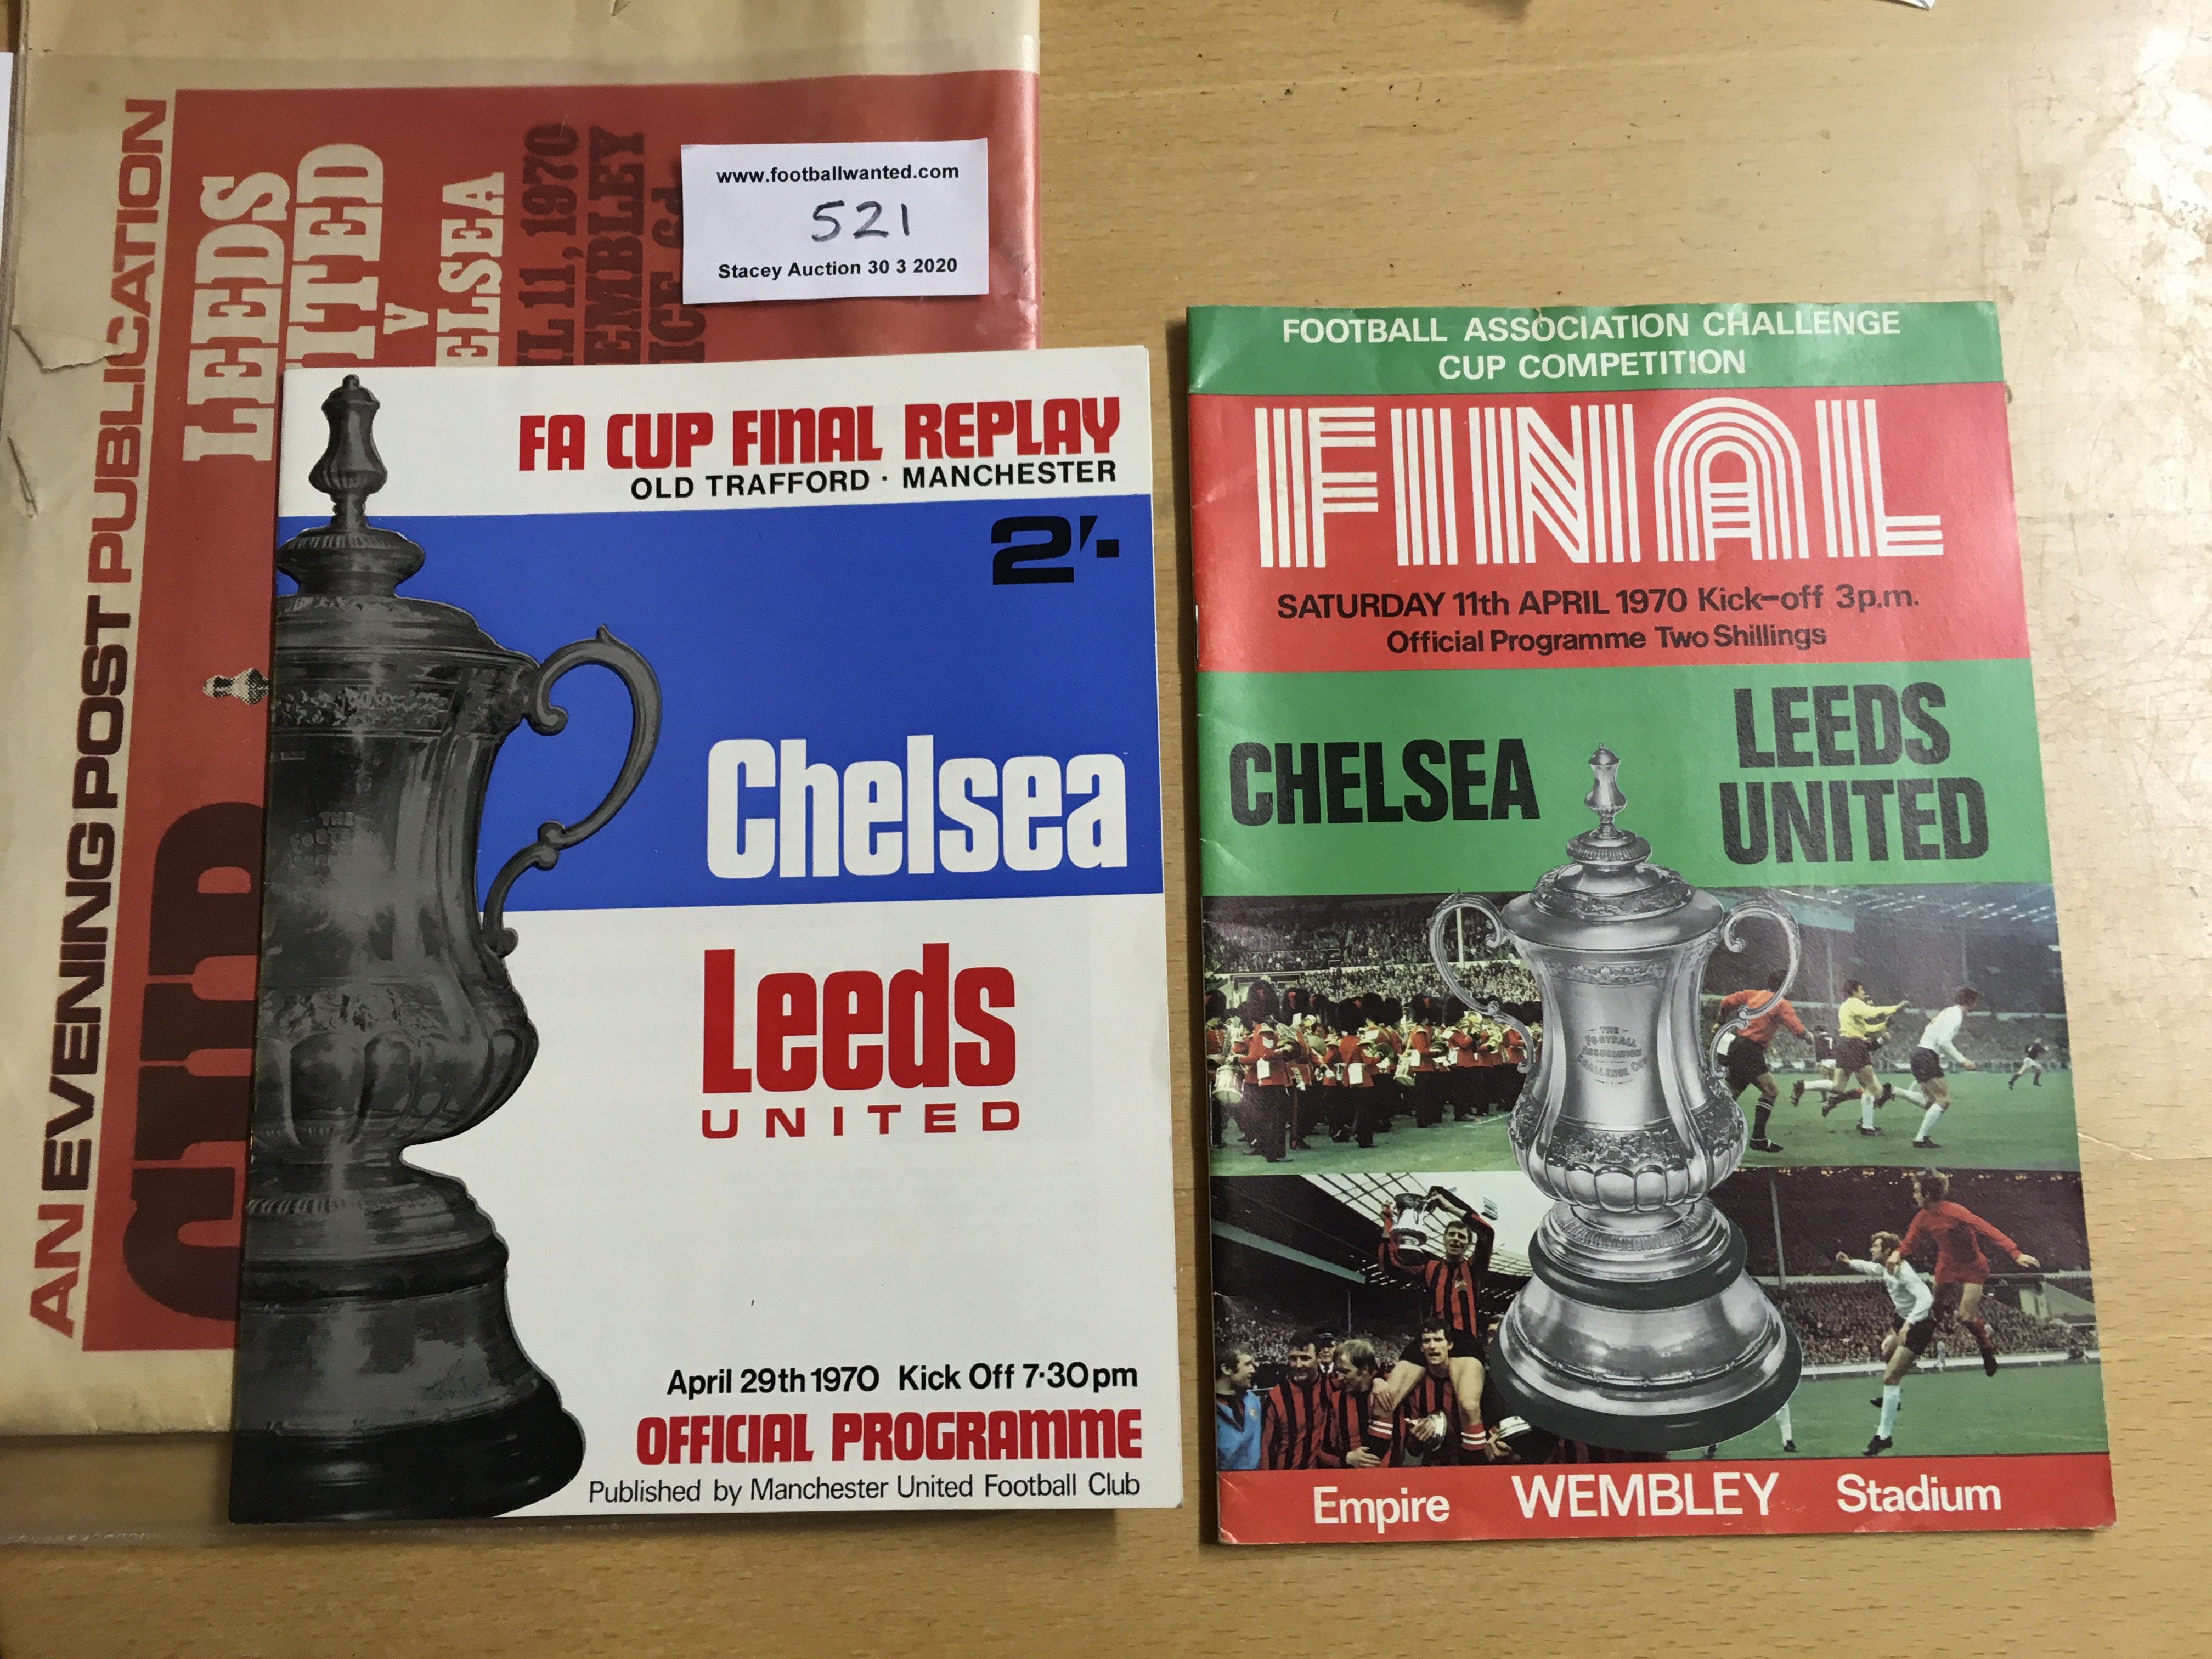 1970 FA Cup Final + Replay Programmes + Tickets: Chelsea v Leeds United to include both programmes